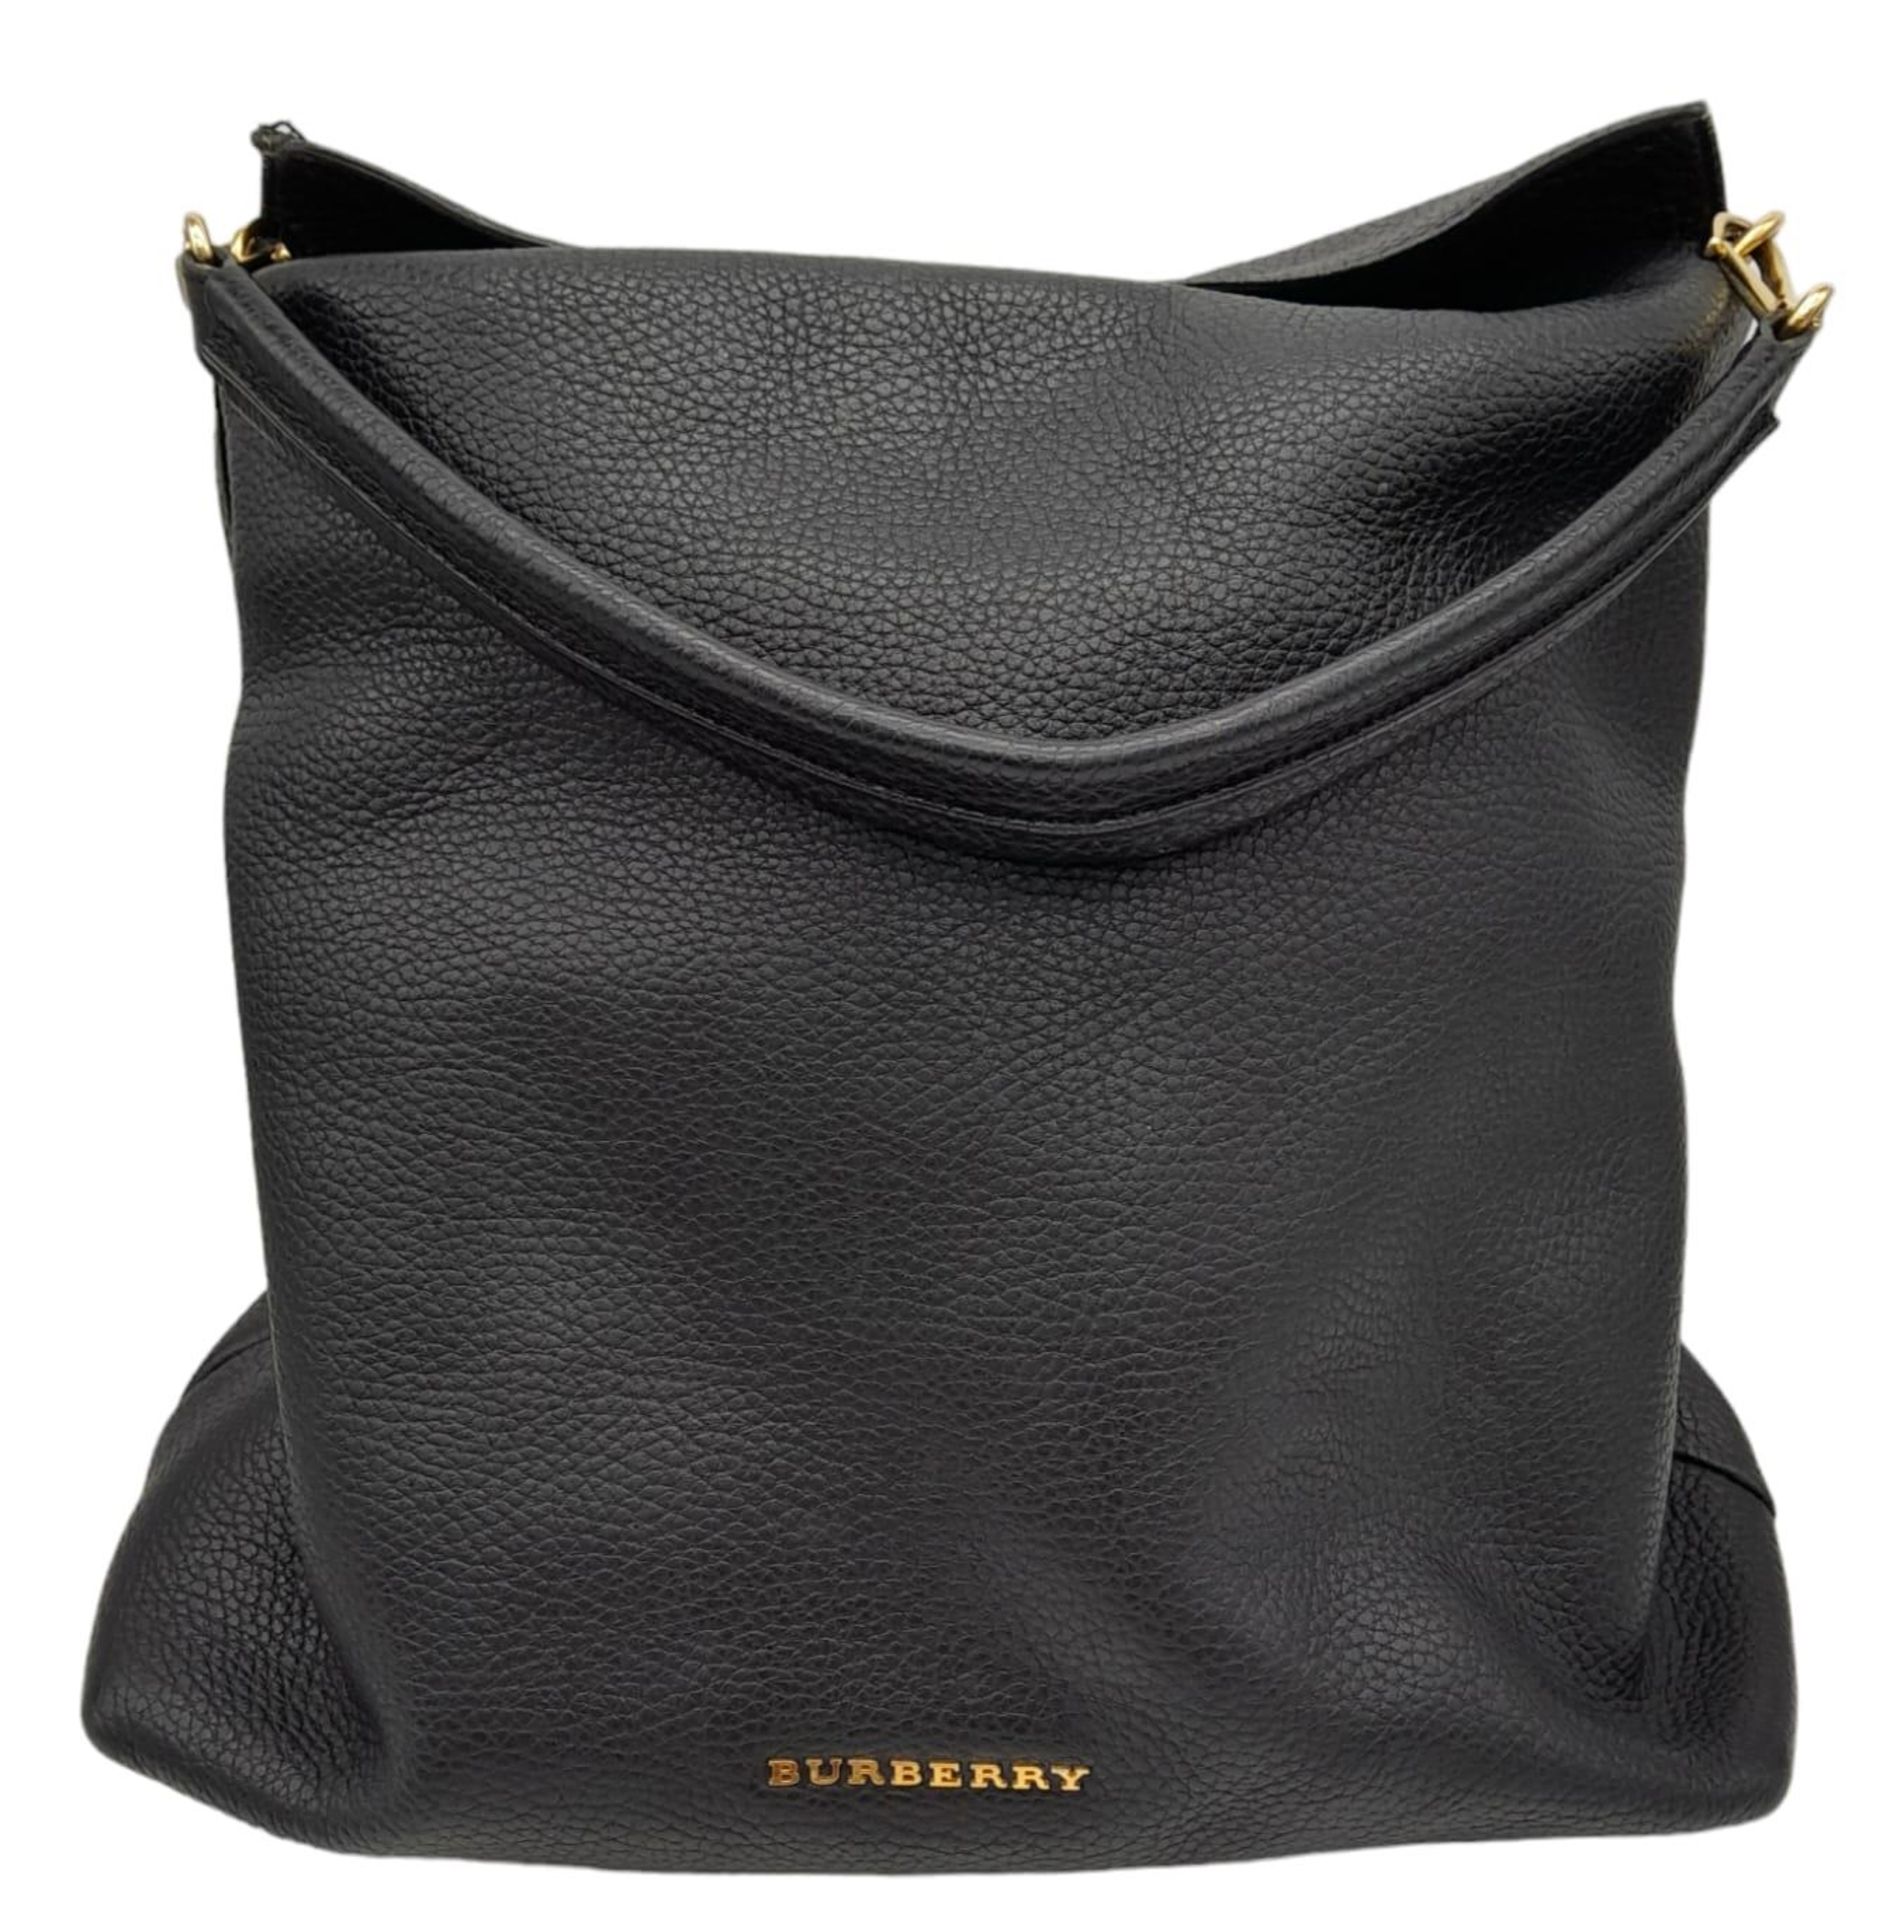 A Burberry Black Cale Hobo Bag. A leather exterior with a looping shoulder strap, gold tone hardware